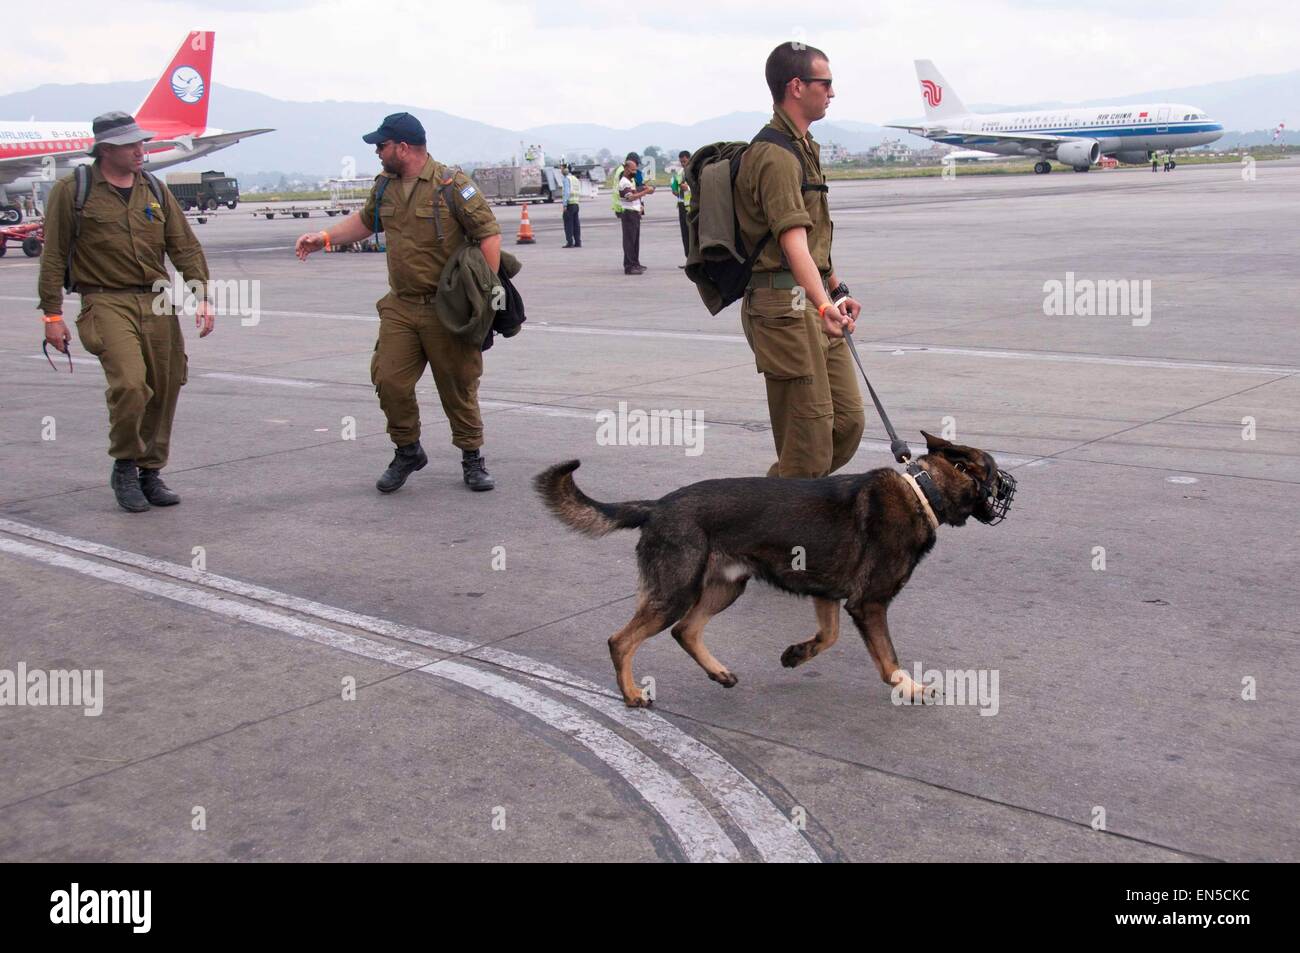 Kathmandu, Nepal. 28th Apr, 2015. An international rescue team arrives at Tribhuvan International Airport in Kathmandu, Nepal, April 28, 2015. The death toll from a powerful earthquake in Nepal soared to 4,555 and a total of 8,299 others were injured, the Nepal Police said. Various international rescue teams performed relief operations in affected regions. Credit:  Pratap Thapa/Xinhua/Alamy Live News Stock Photo